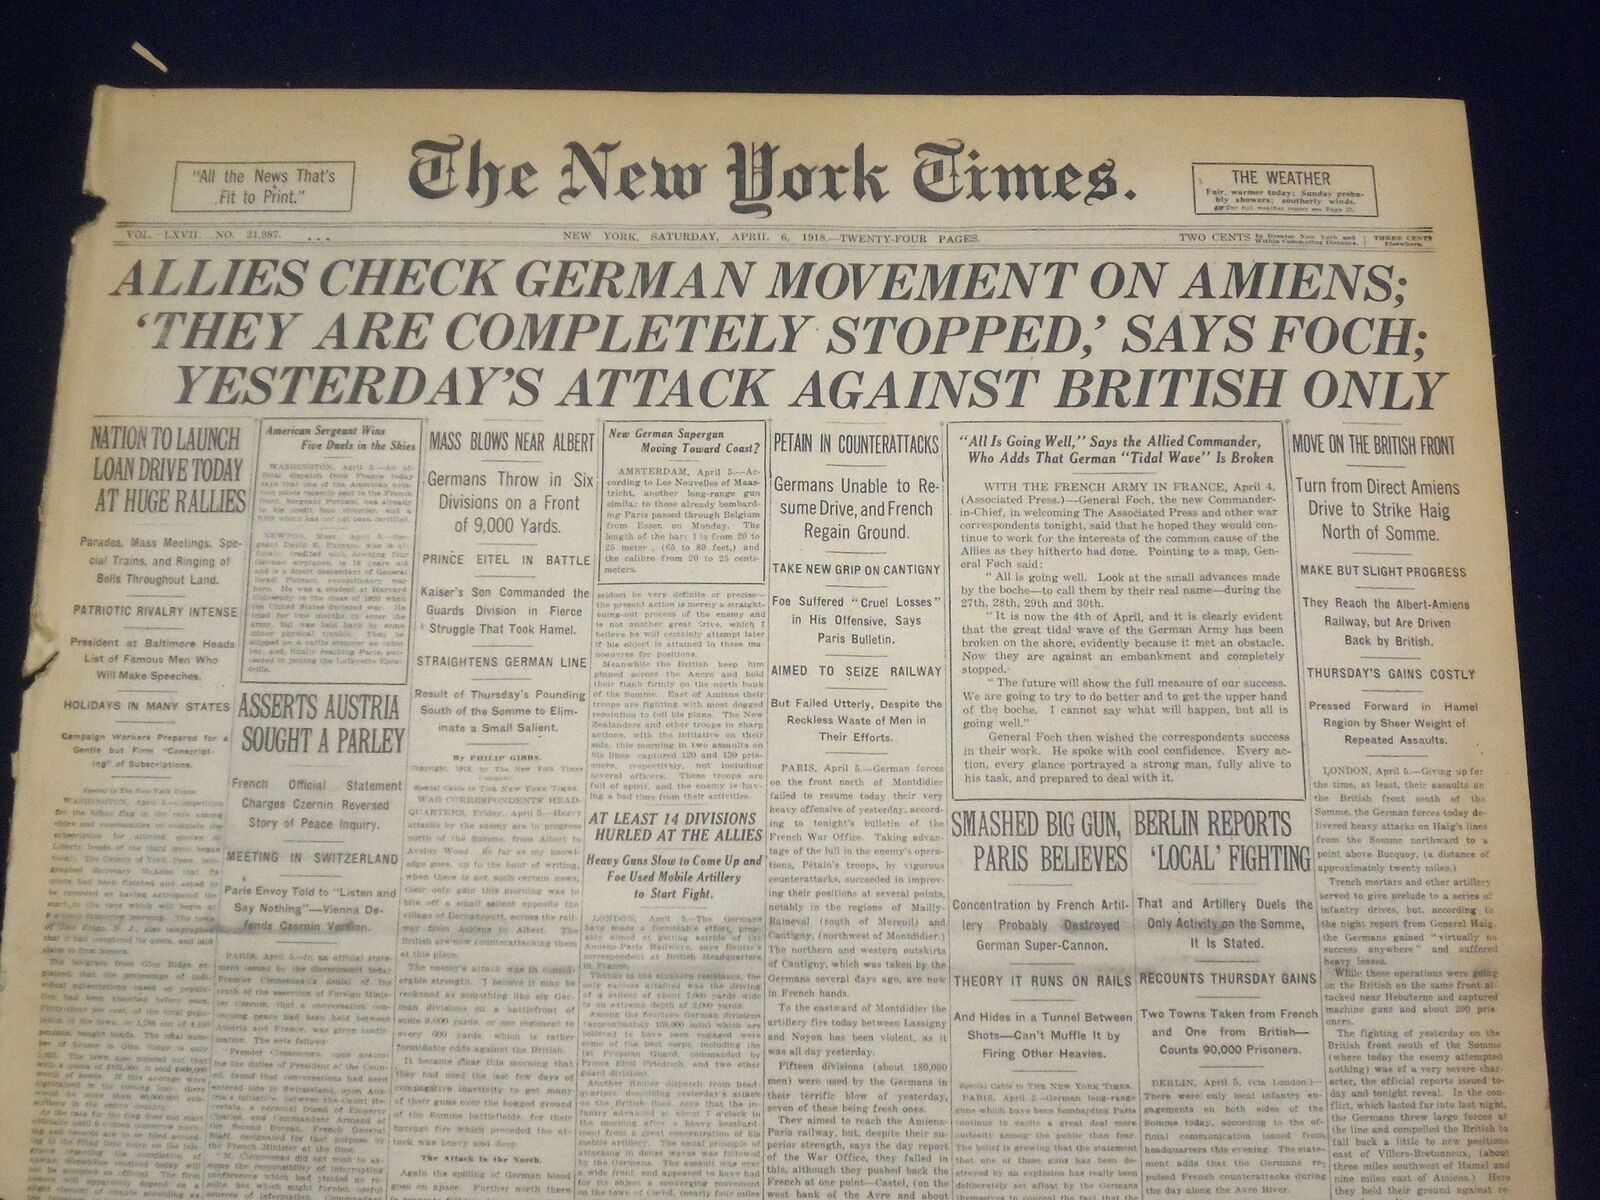 1918 APRIL 6 NEW YORK TIMES - ALLIES CHECK GERMAN MOVEMENT ON AMIENS - NT 8203